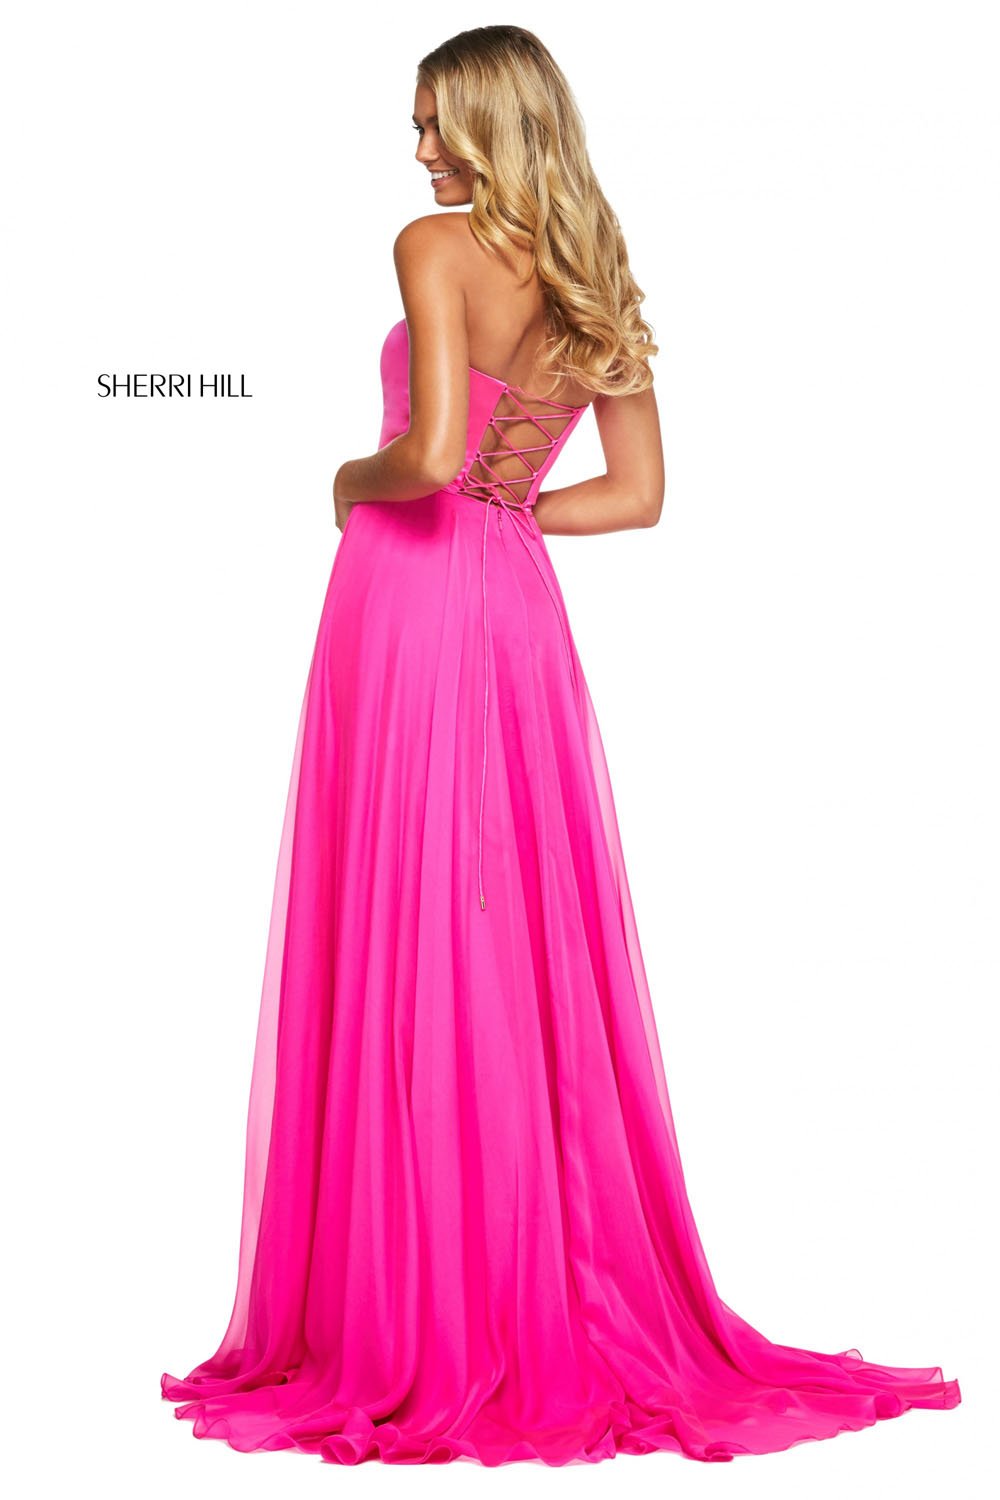 Sherri Hill 53574 dress images in these colors: Red, Royal, Coral, Light Blue, Hot Pink, Yellow, Navy, Emerald, Periwinkle, Candy Pink, Bright Pink, Aqua.